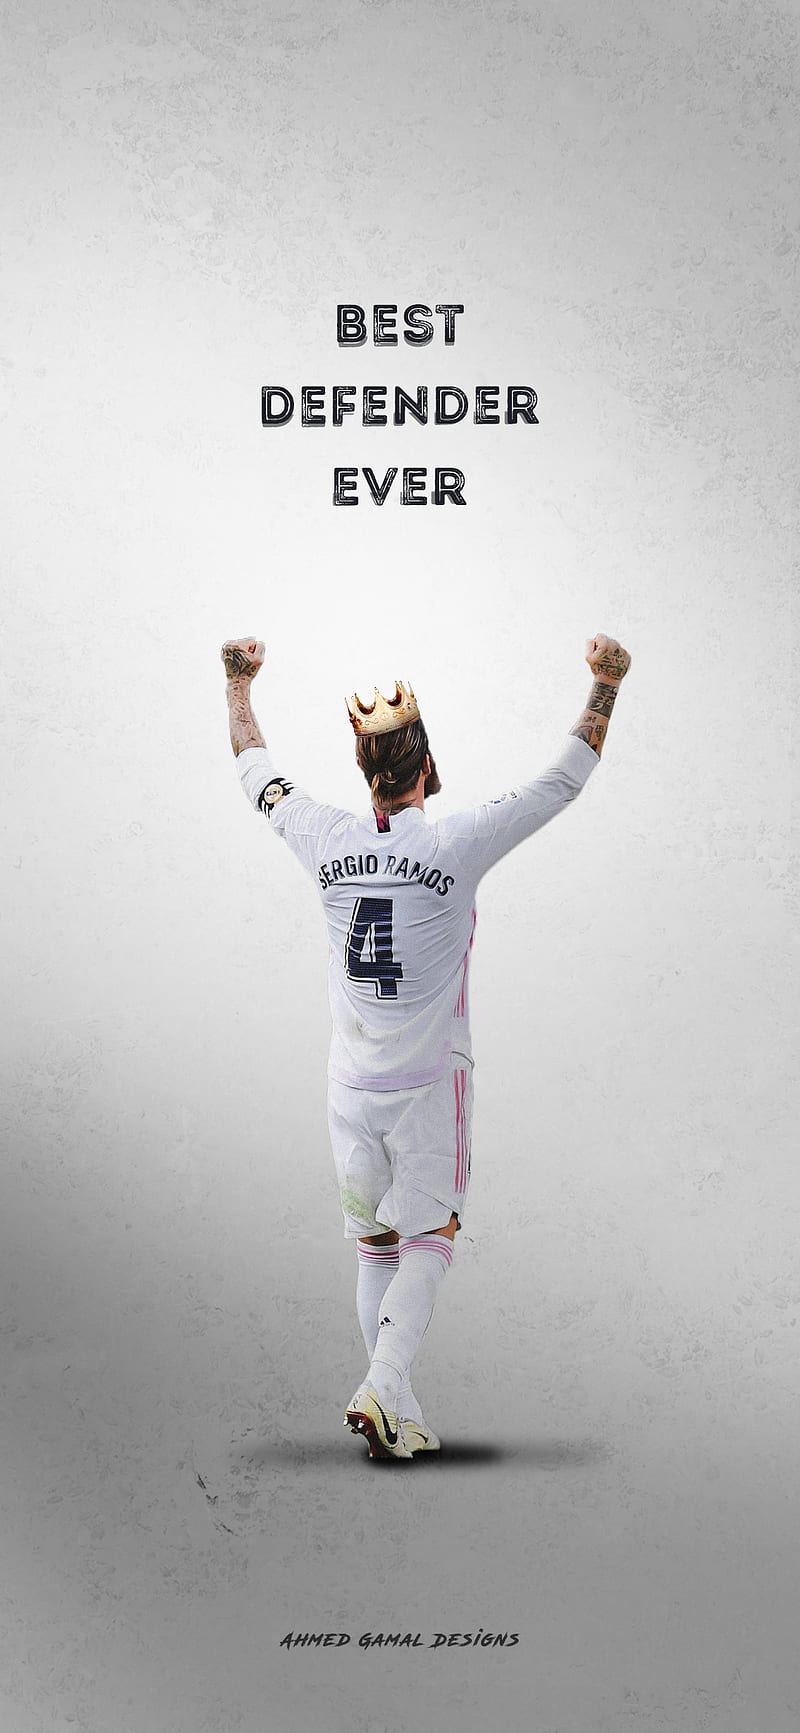 Sergio Ramos HQ Images x 40 iPhone X Wallpapers Free Download